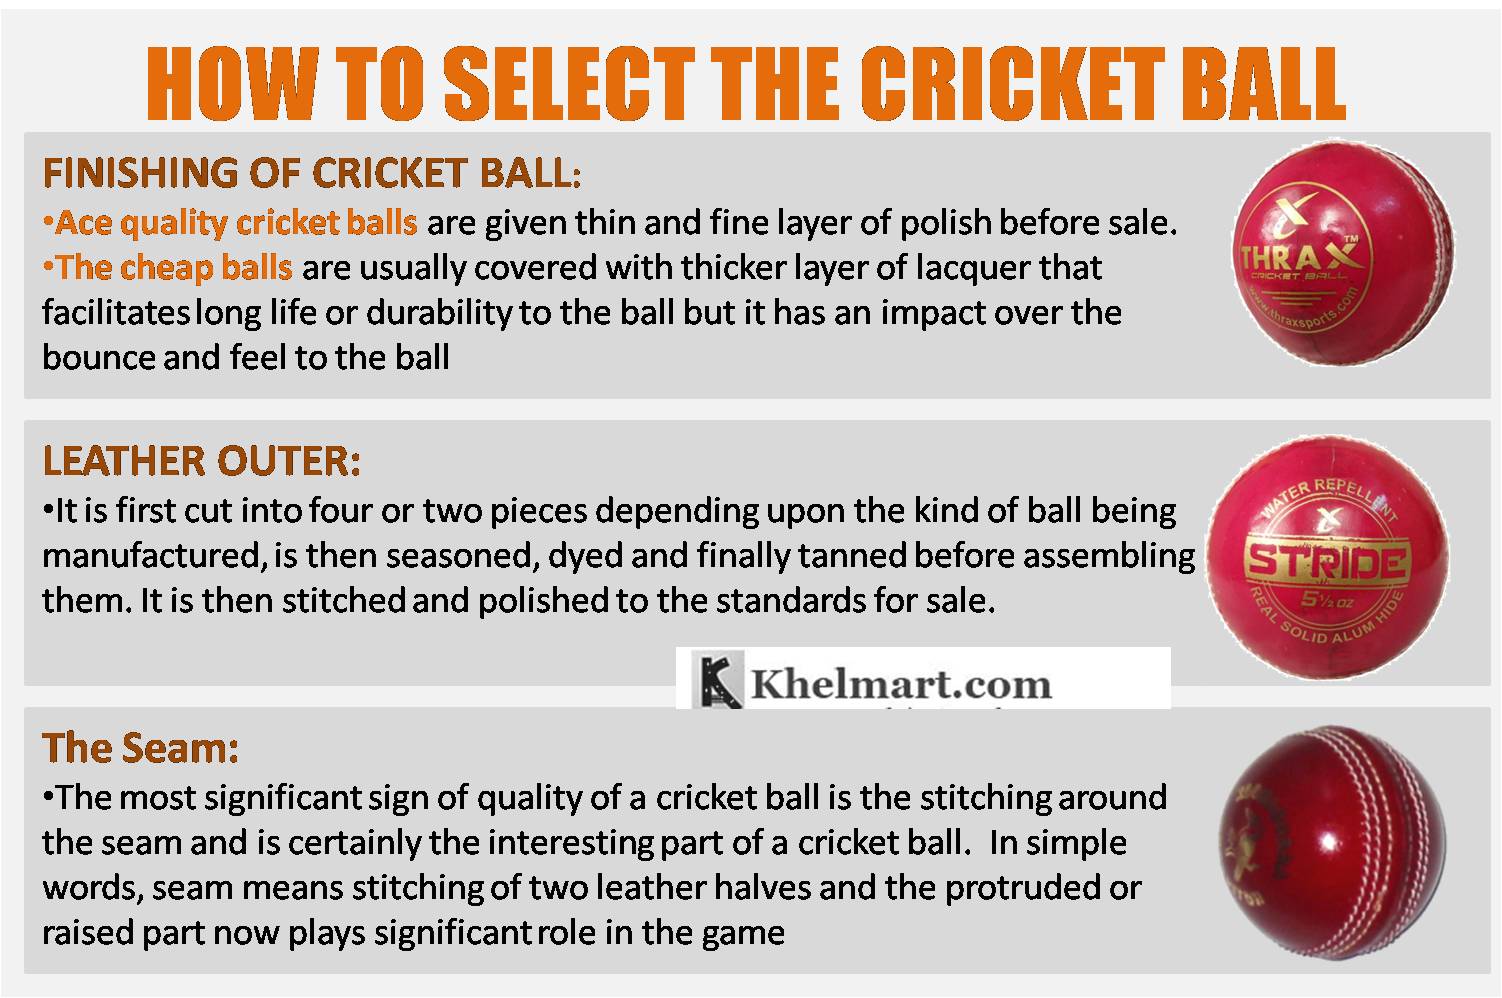 HOW_TO_SELECT_THE_CRICKET_BALL.jpg